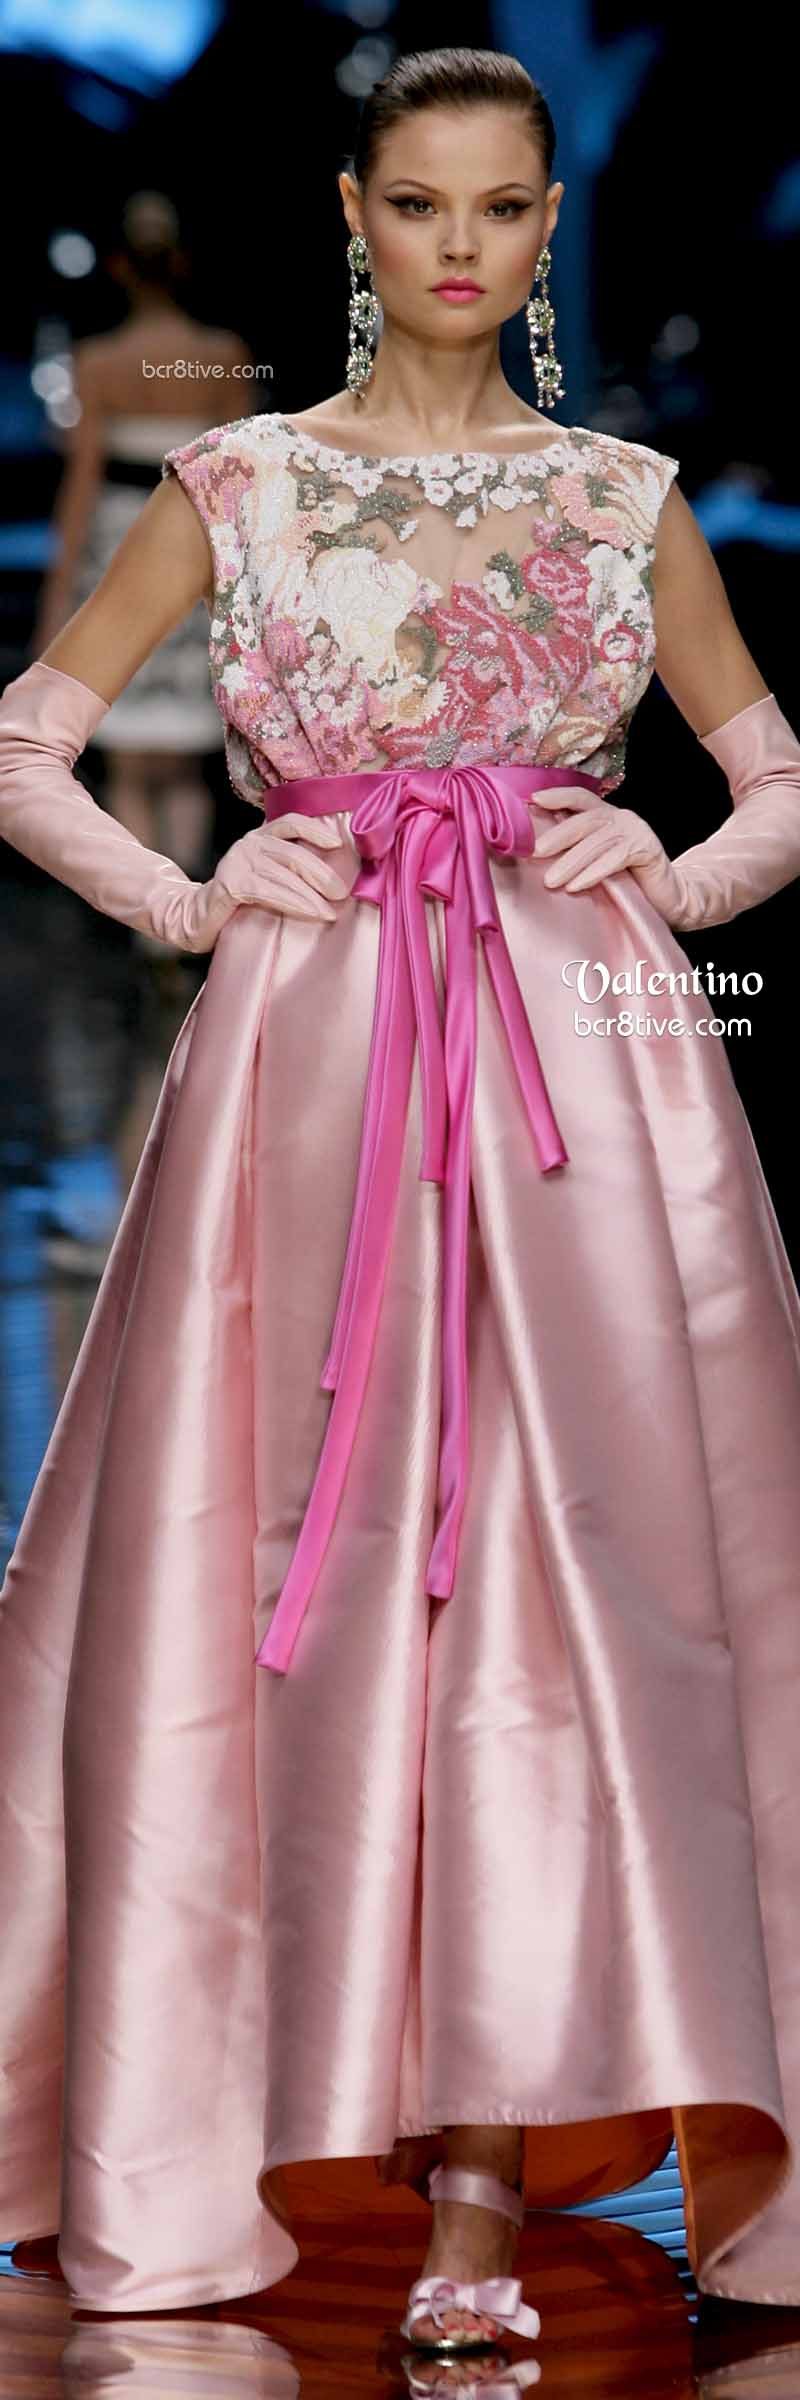 Pale Pink and Floral Valentino Gown